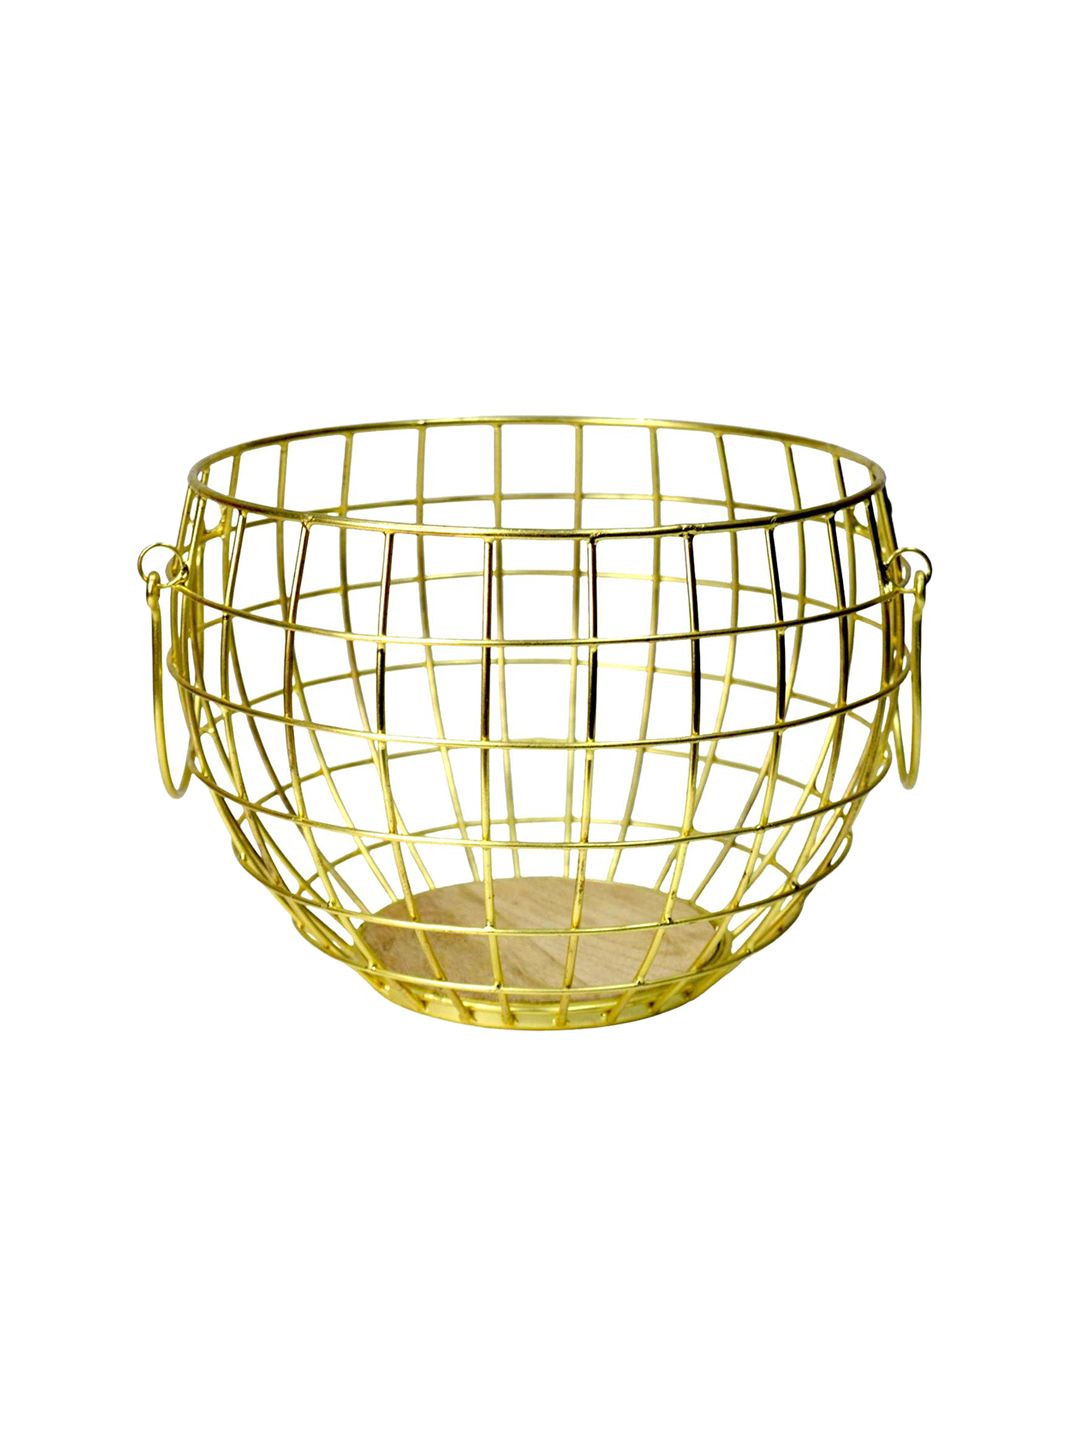 Tranquil square Gold-Toned Round Fruit & Vegetable Basket Price in India